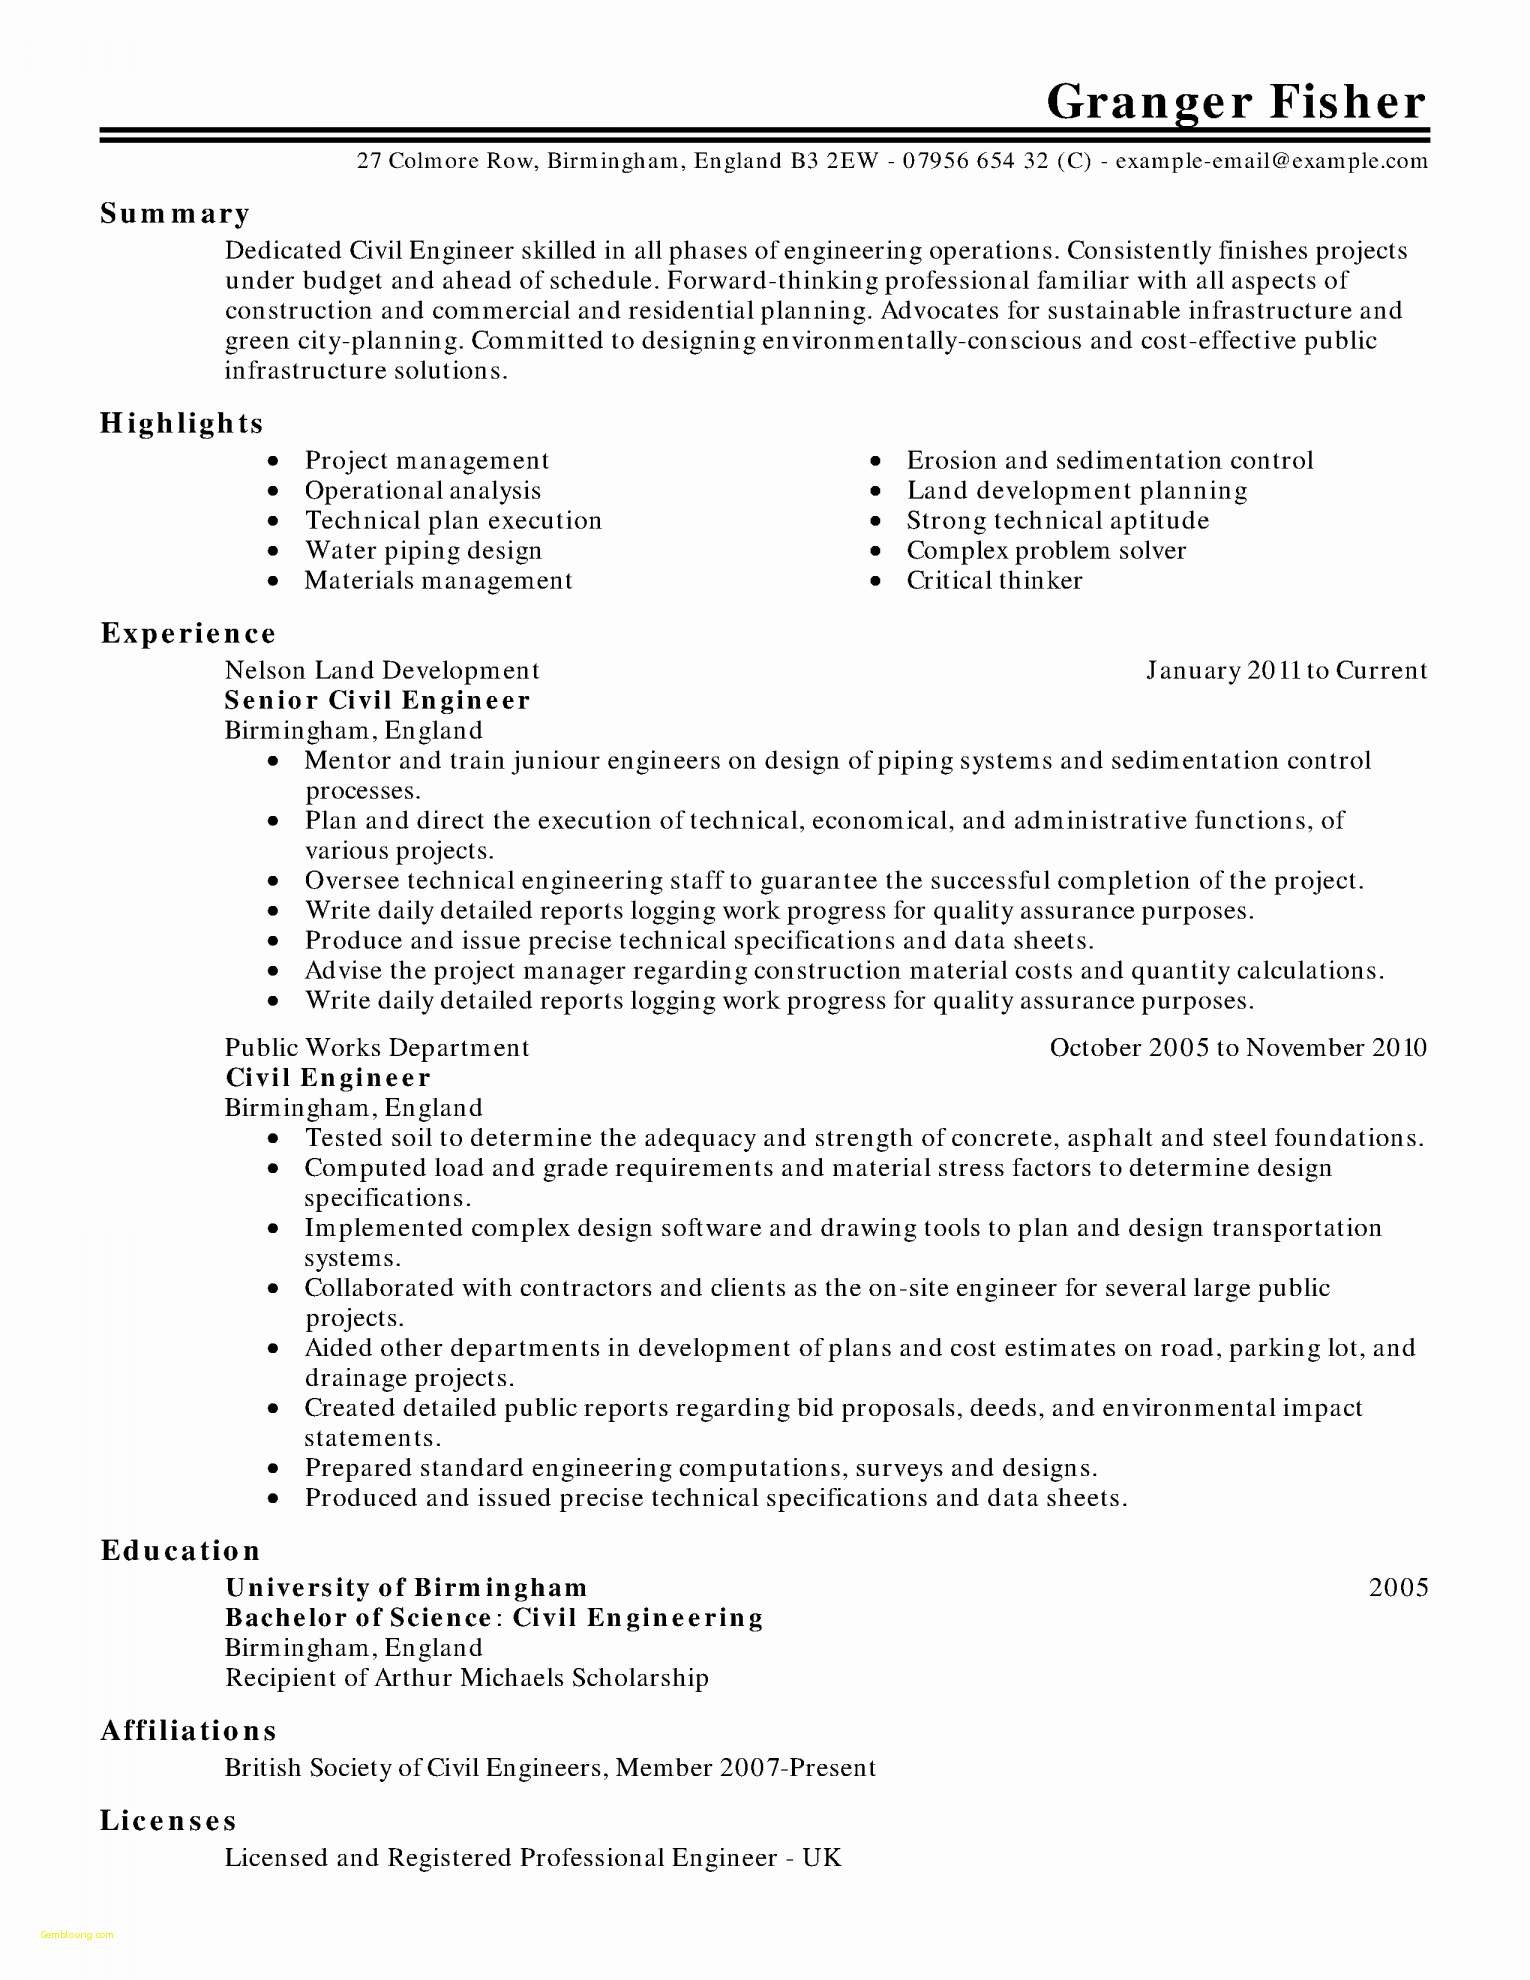 Basic Cover Letter Template Free - Basic Cover Letter format Fresh Simple Resume format Free Download